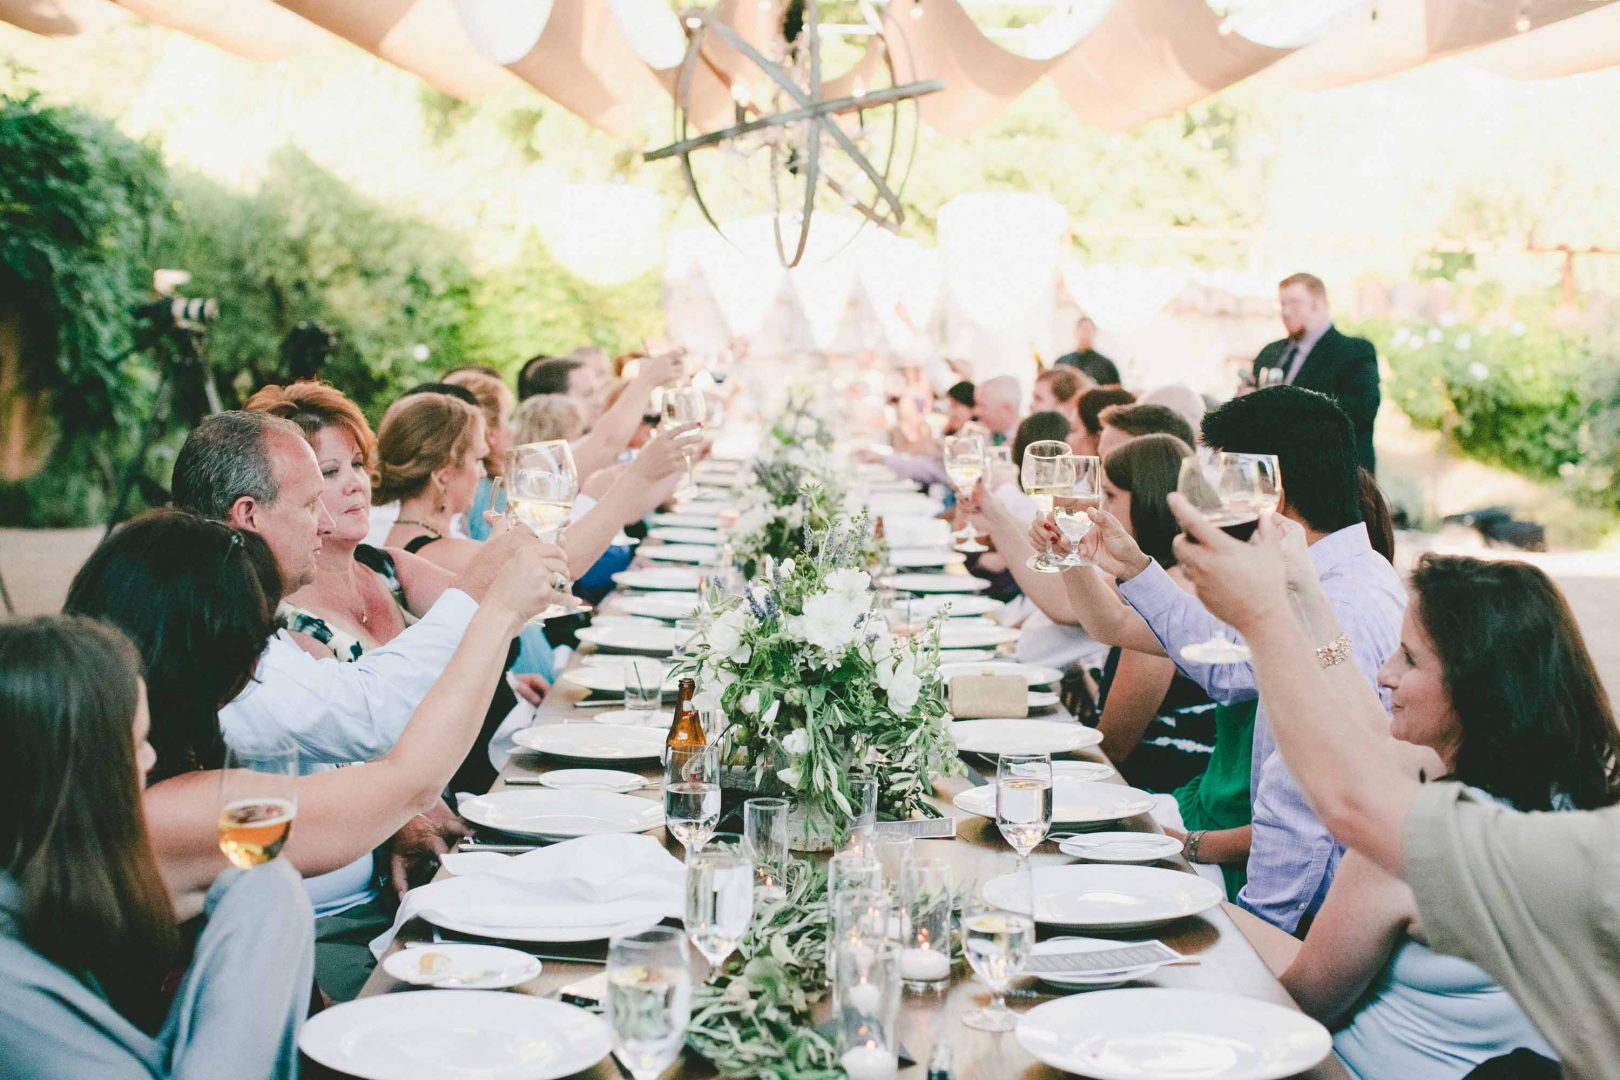 people toasting with wine in a super long table served with plates waiting for the food